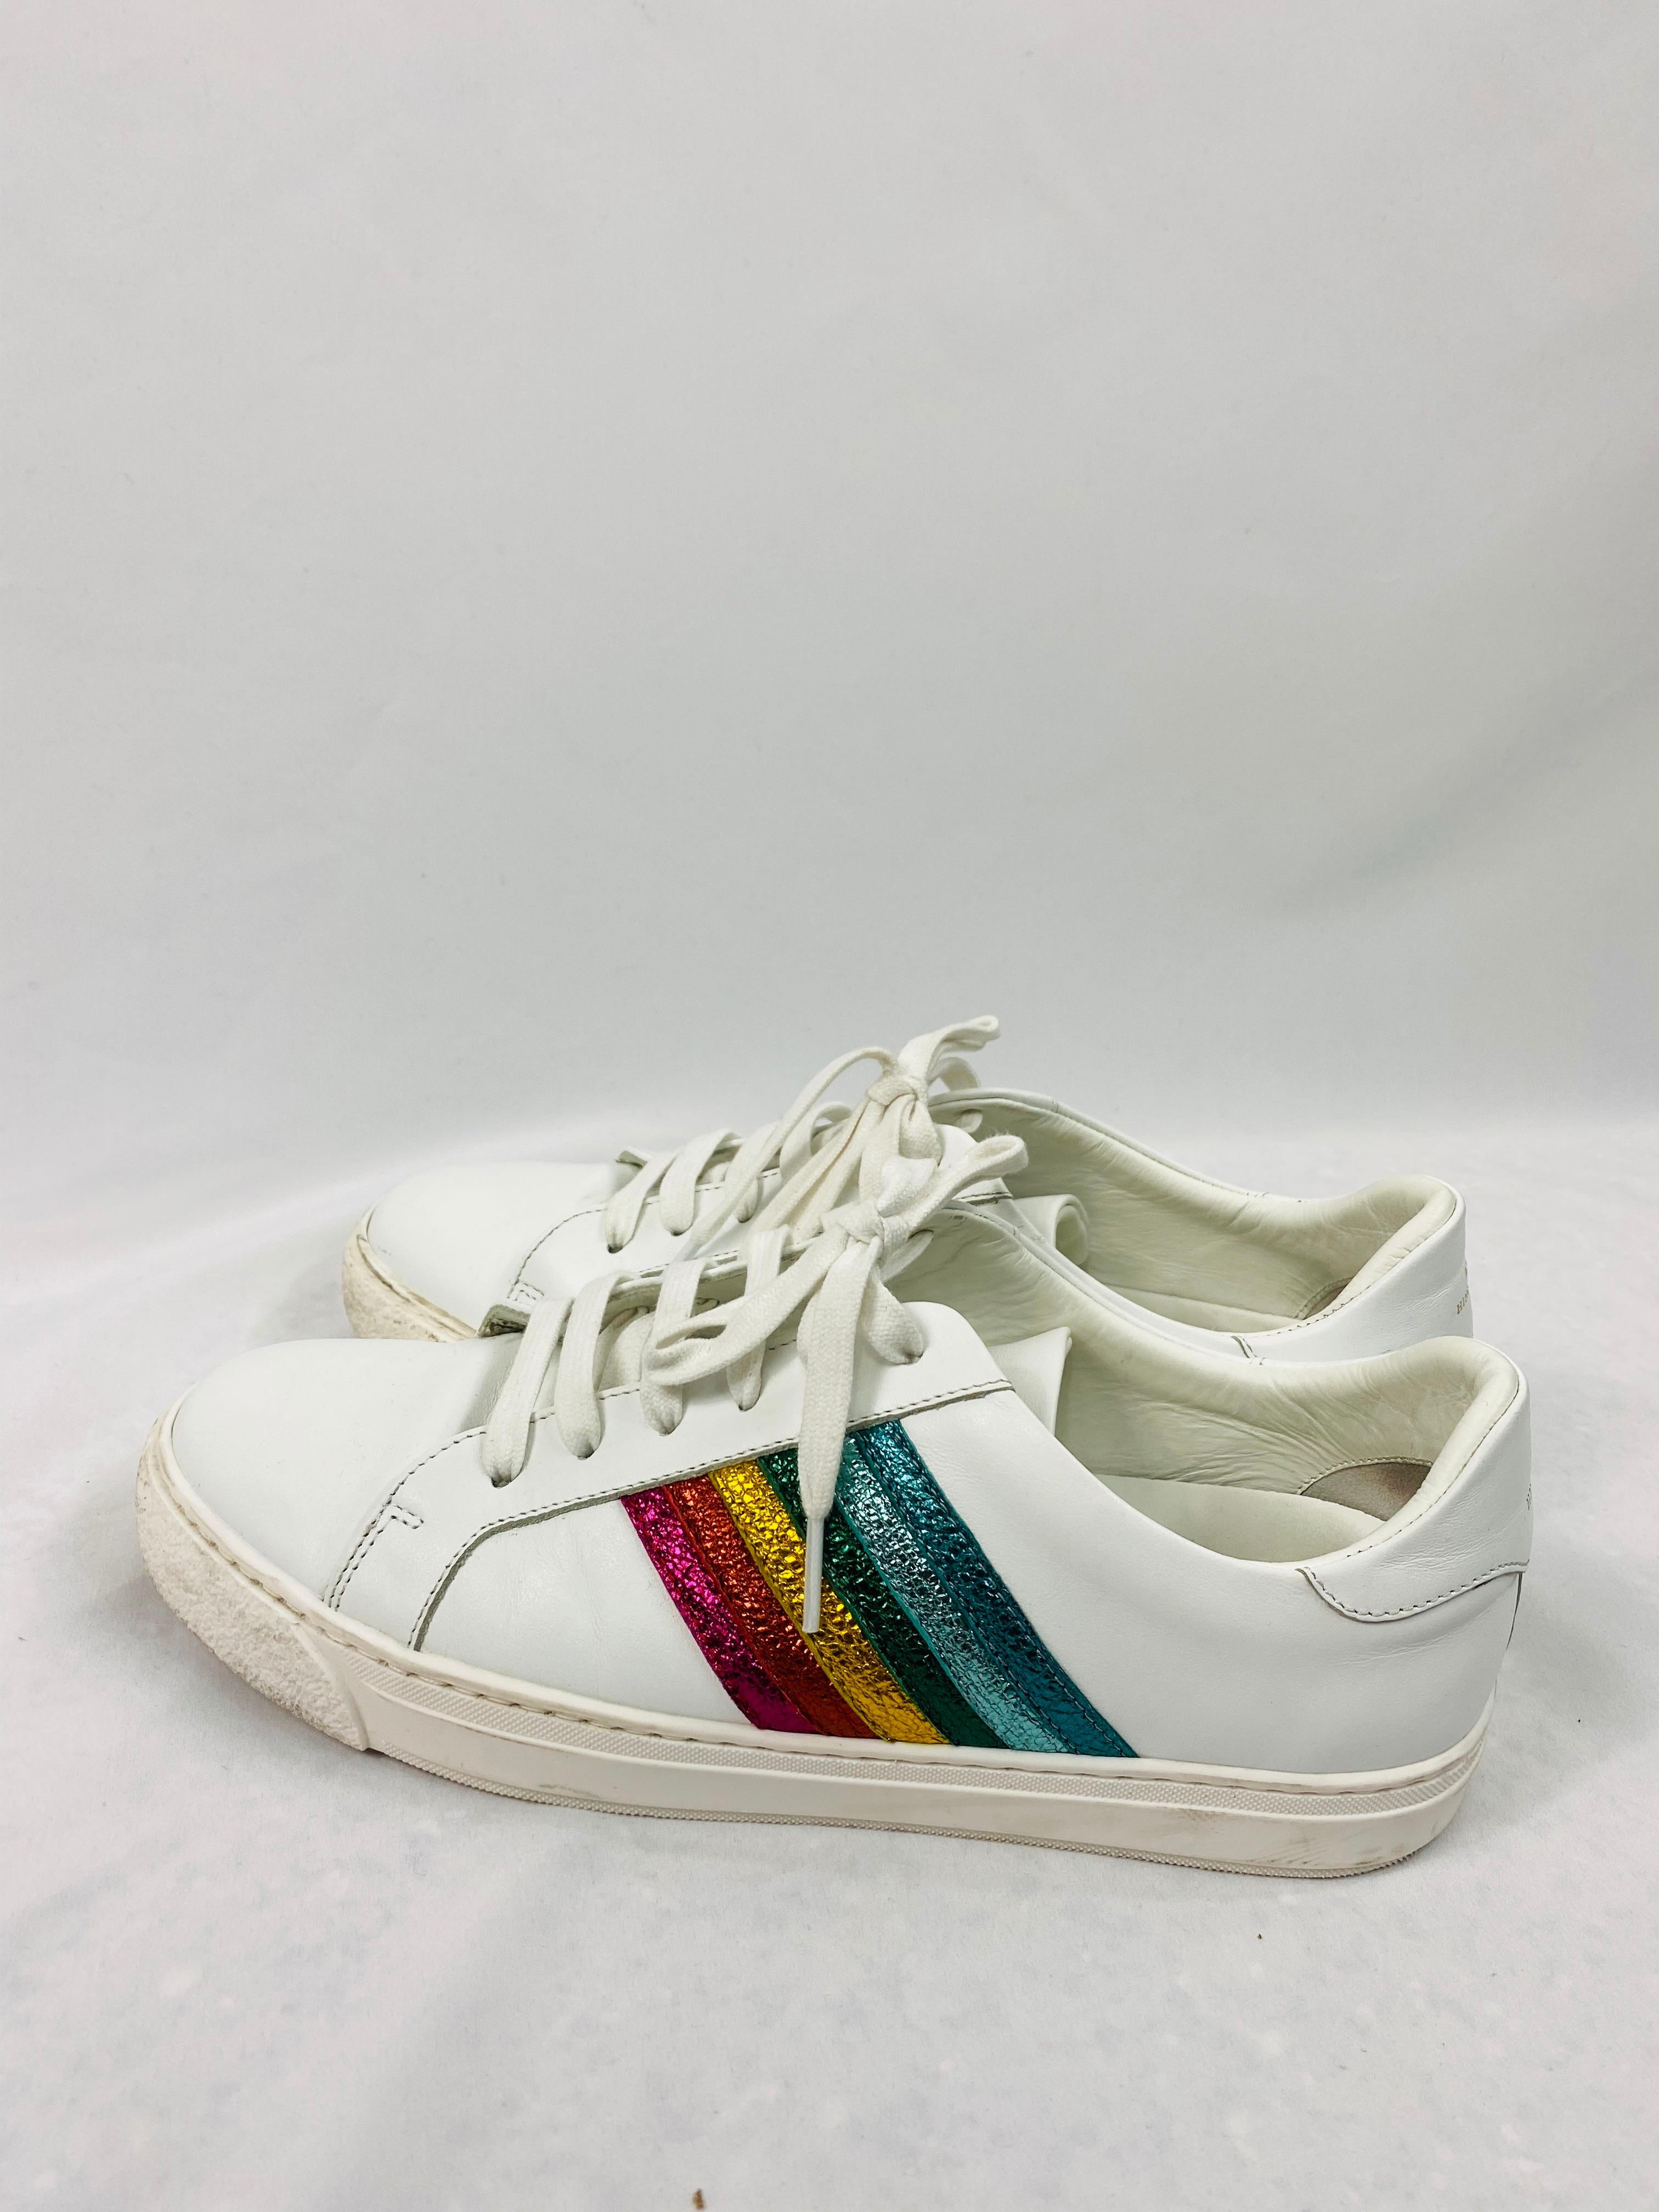 Anya Hindmarch White Leather Sneakers Size 39 For Sale 1